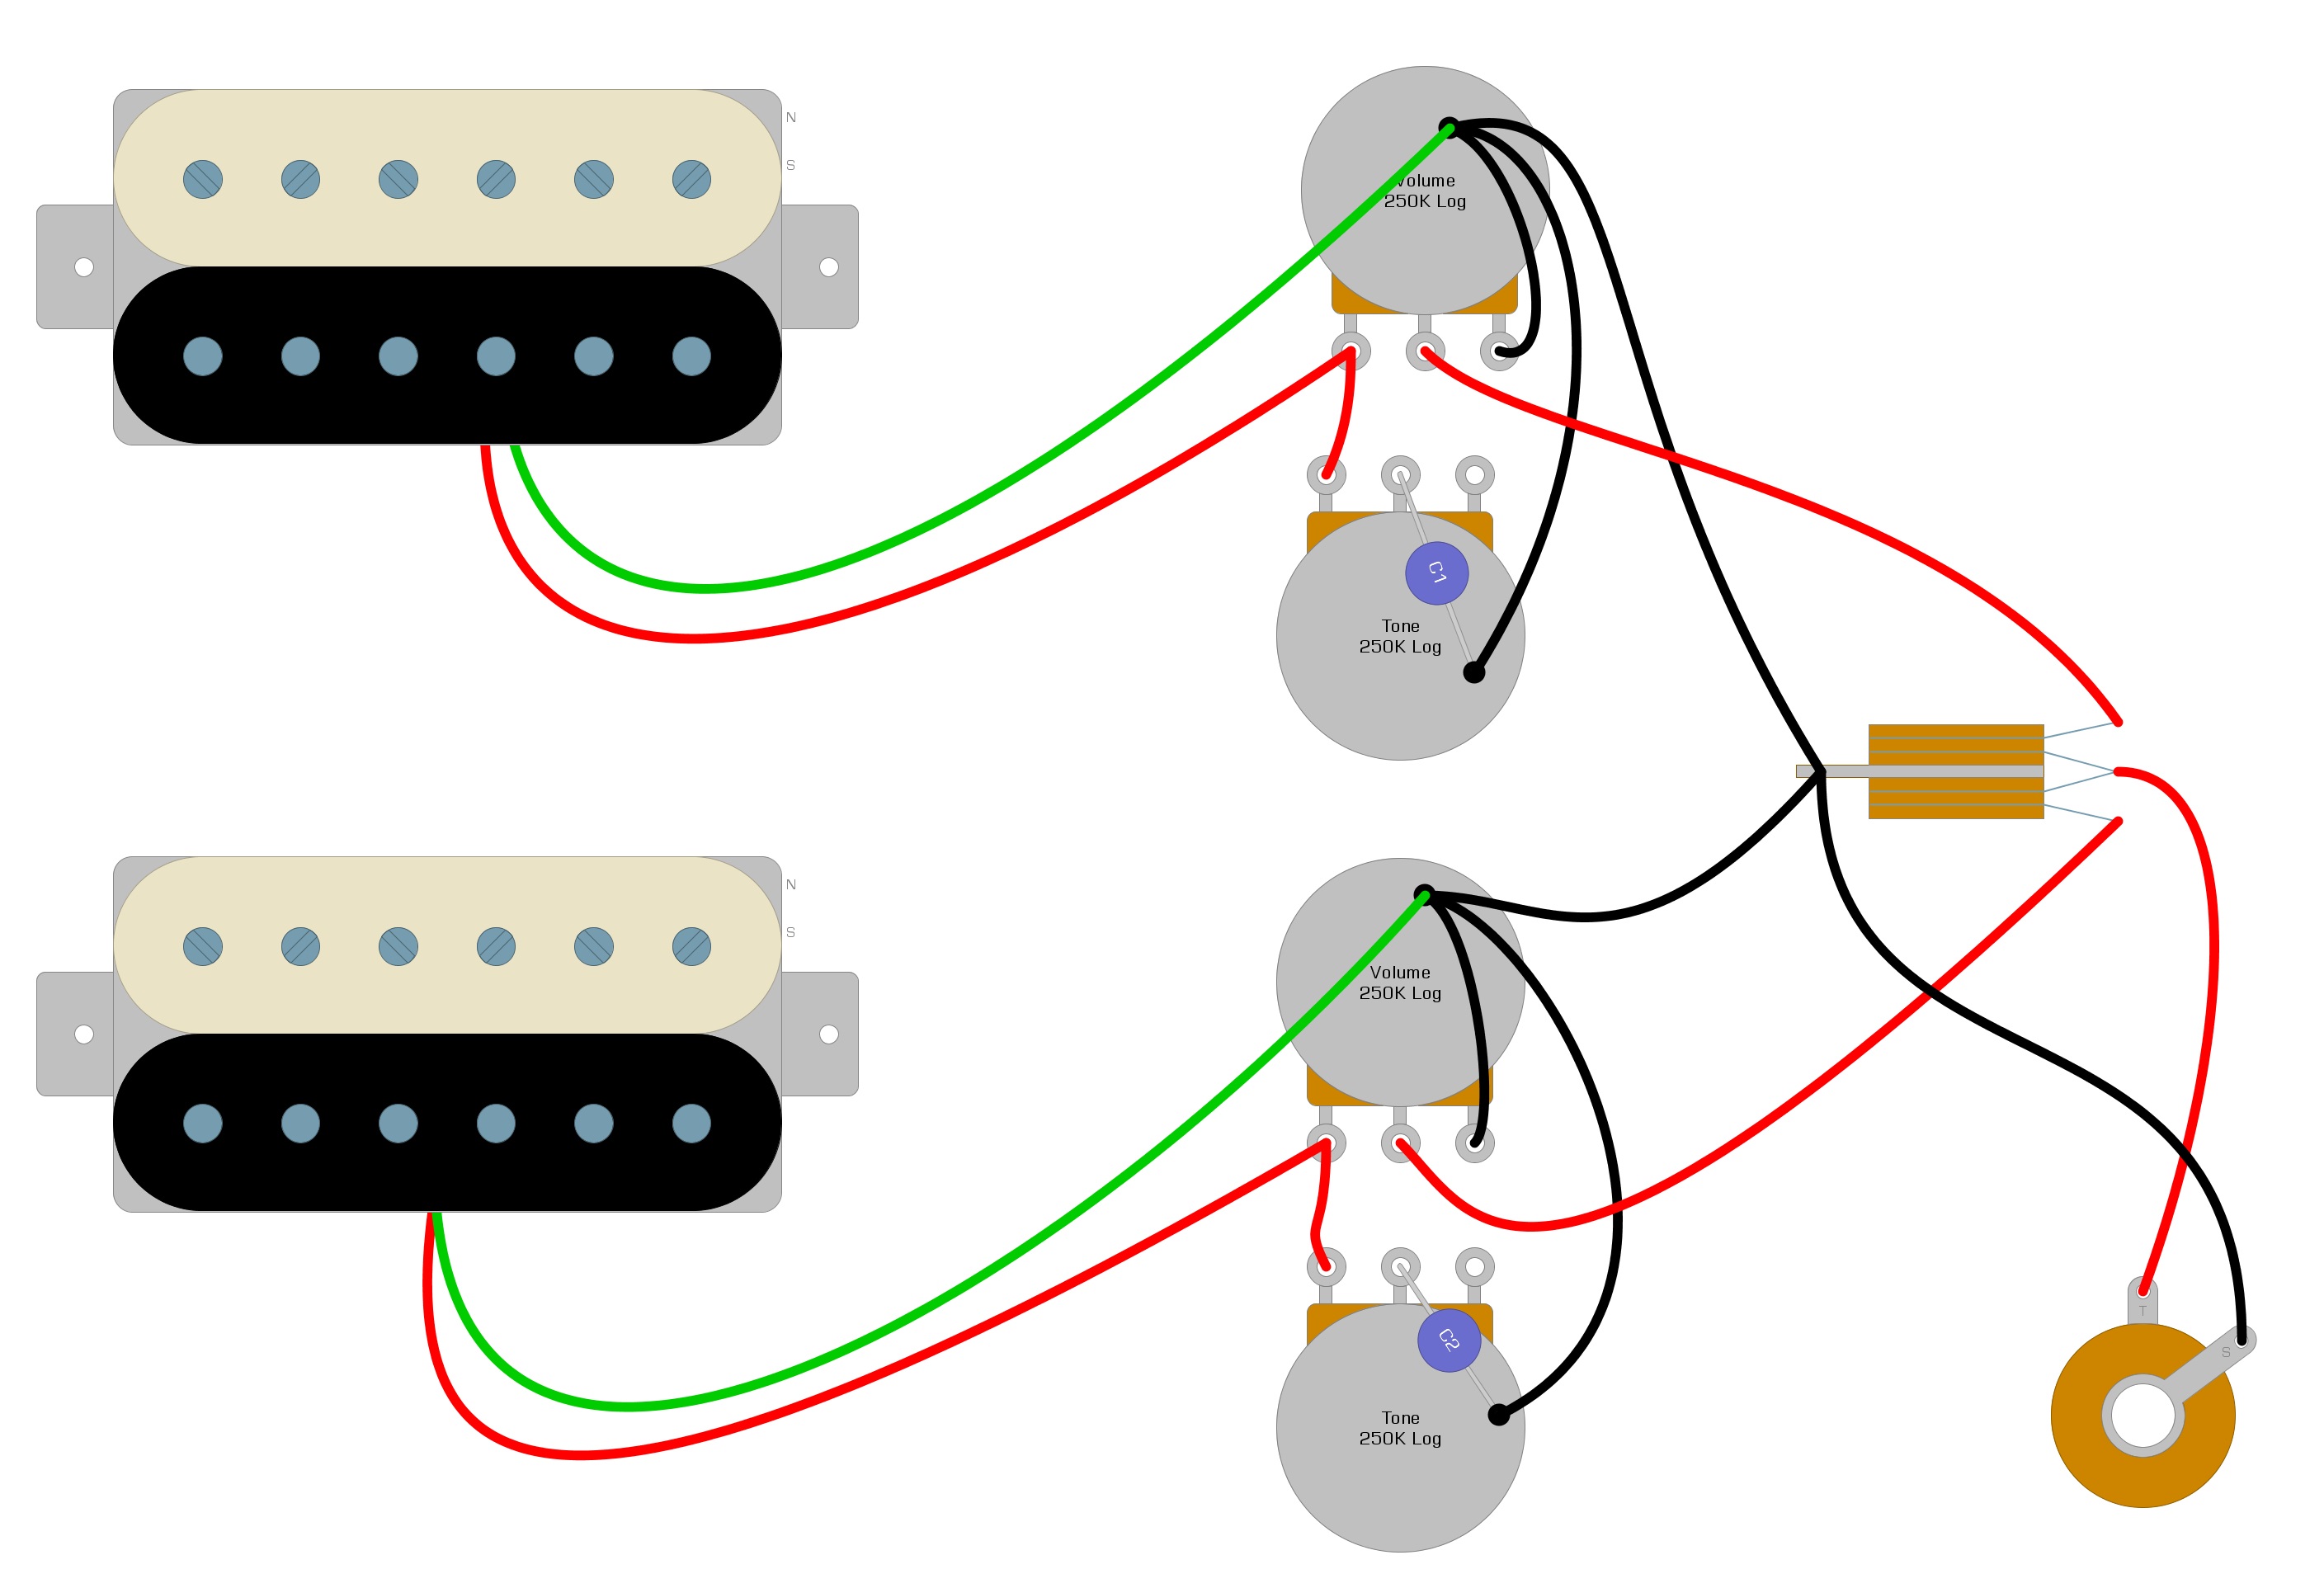 Wiring Diagram For Dimarzio Paf Pro Humbucker from humbuckersoup.com